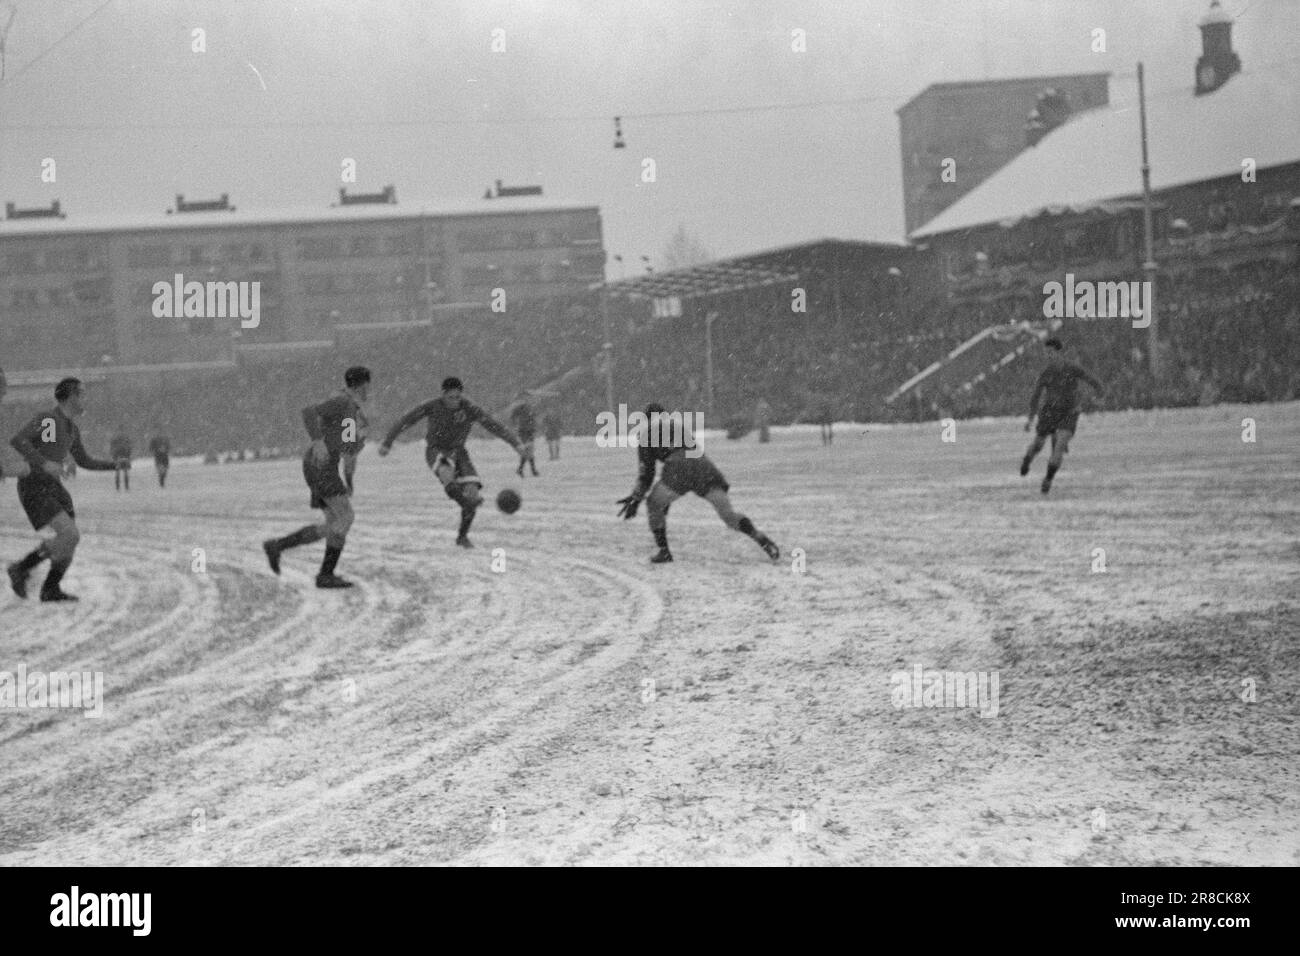 Current 23-3-1947: Dynamo Skeid in winter modeThe 'Dynamo'-'Skeid' match at Bislett was in every respect one of the strangest football matches on the Norwegian field. Before and during the match, it snowed heavily, and the grass was white and hard with snow drifts around when the players made their entrance and were hailed by 32,000 spectators - a record at Bislett. It was a display of good football.  Photo: Th. Skotaam / Aktuell / NTB ***PHOTO NOT IMAGE PROCESSED*** Stock Photo